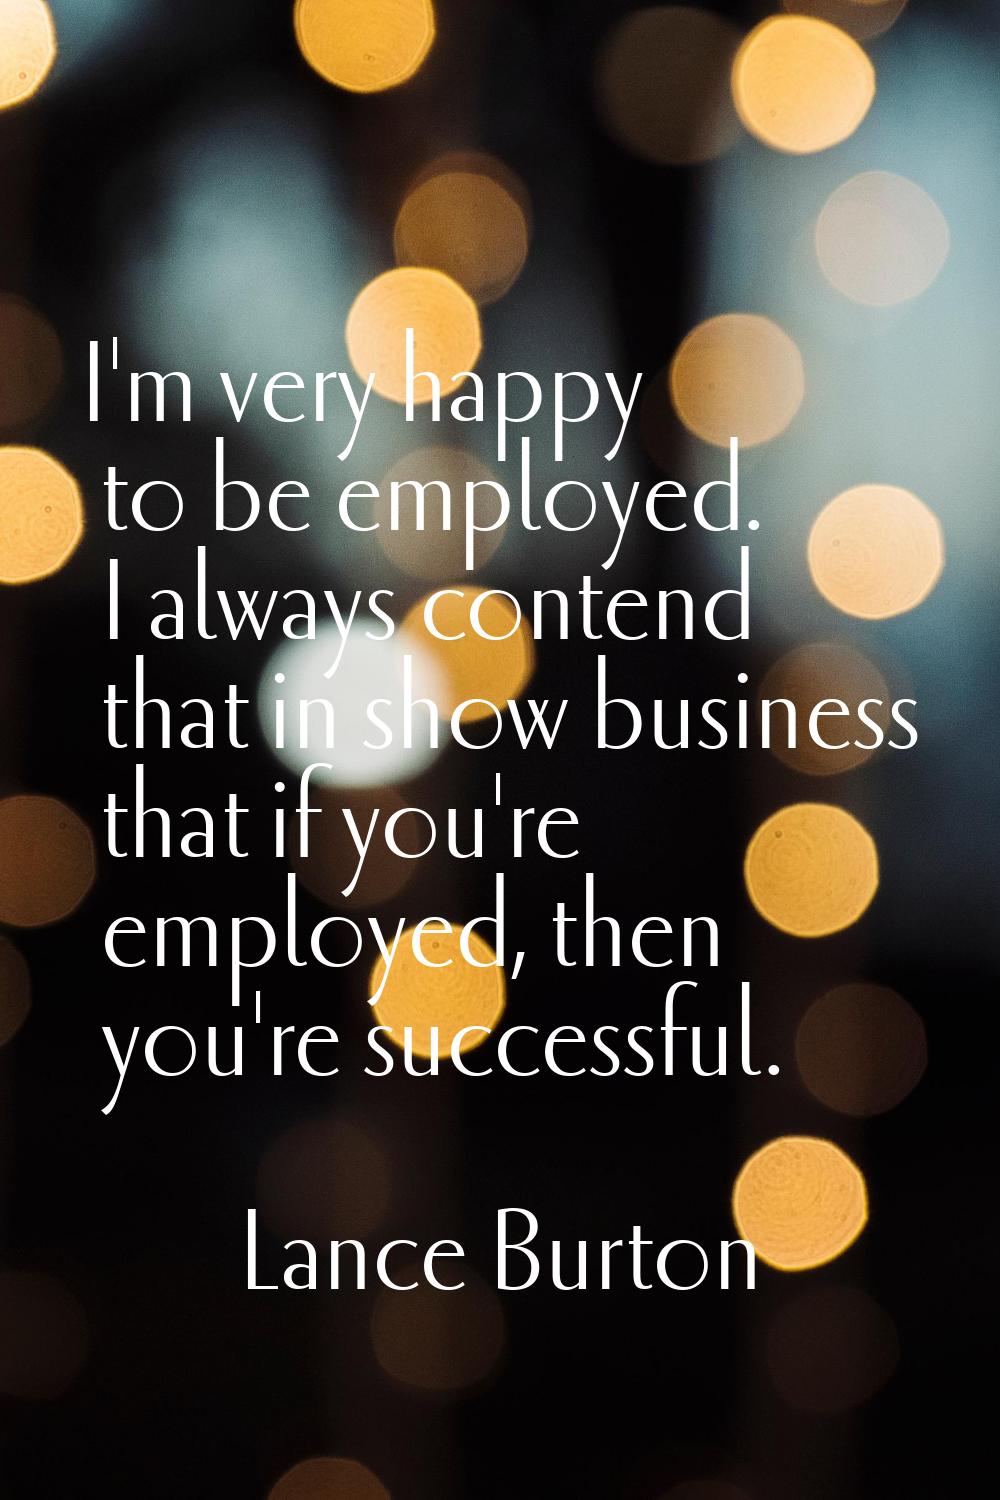 I'm very happy to be employed. I always contend that in show business that if you're employed, then